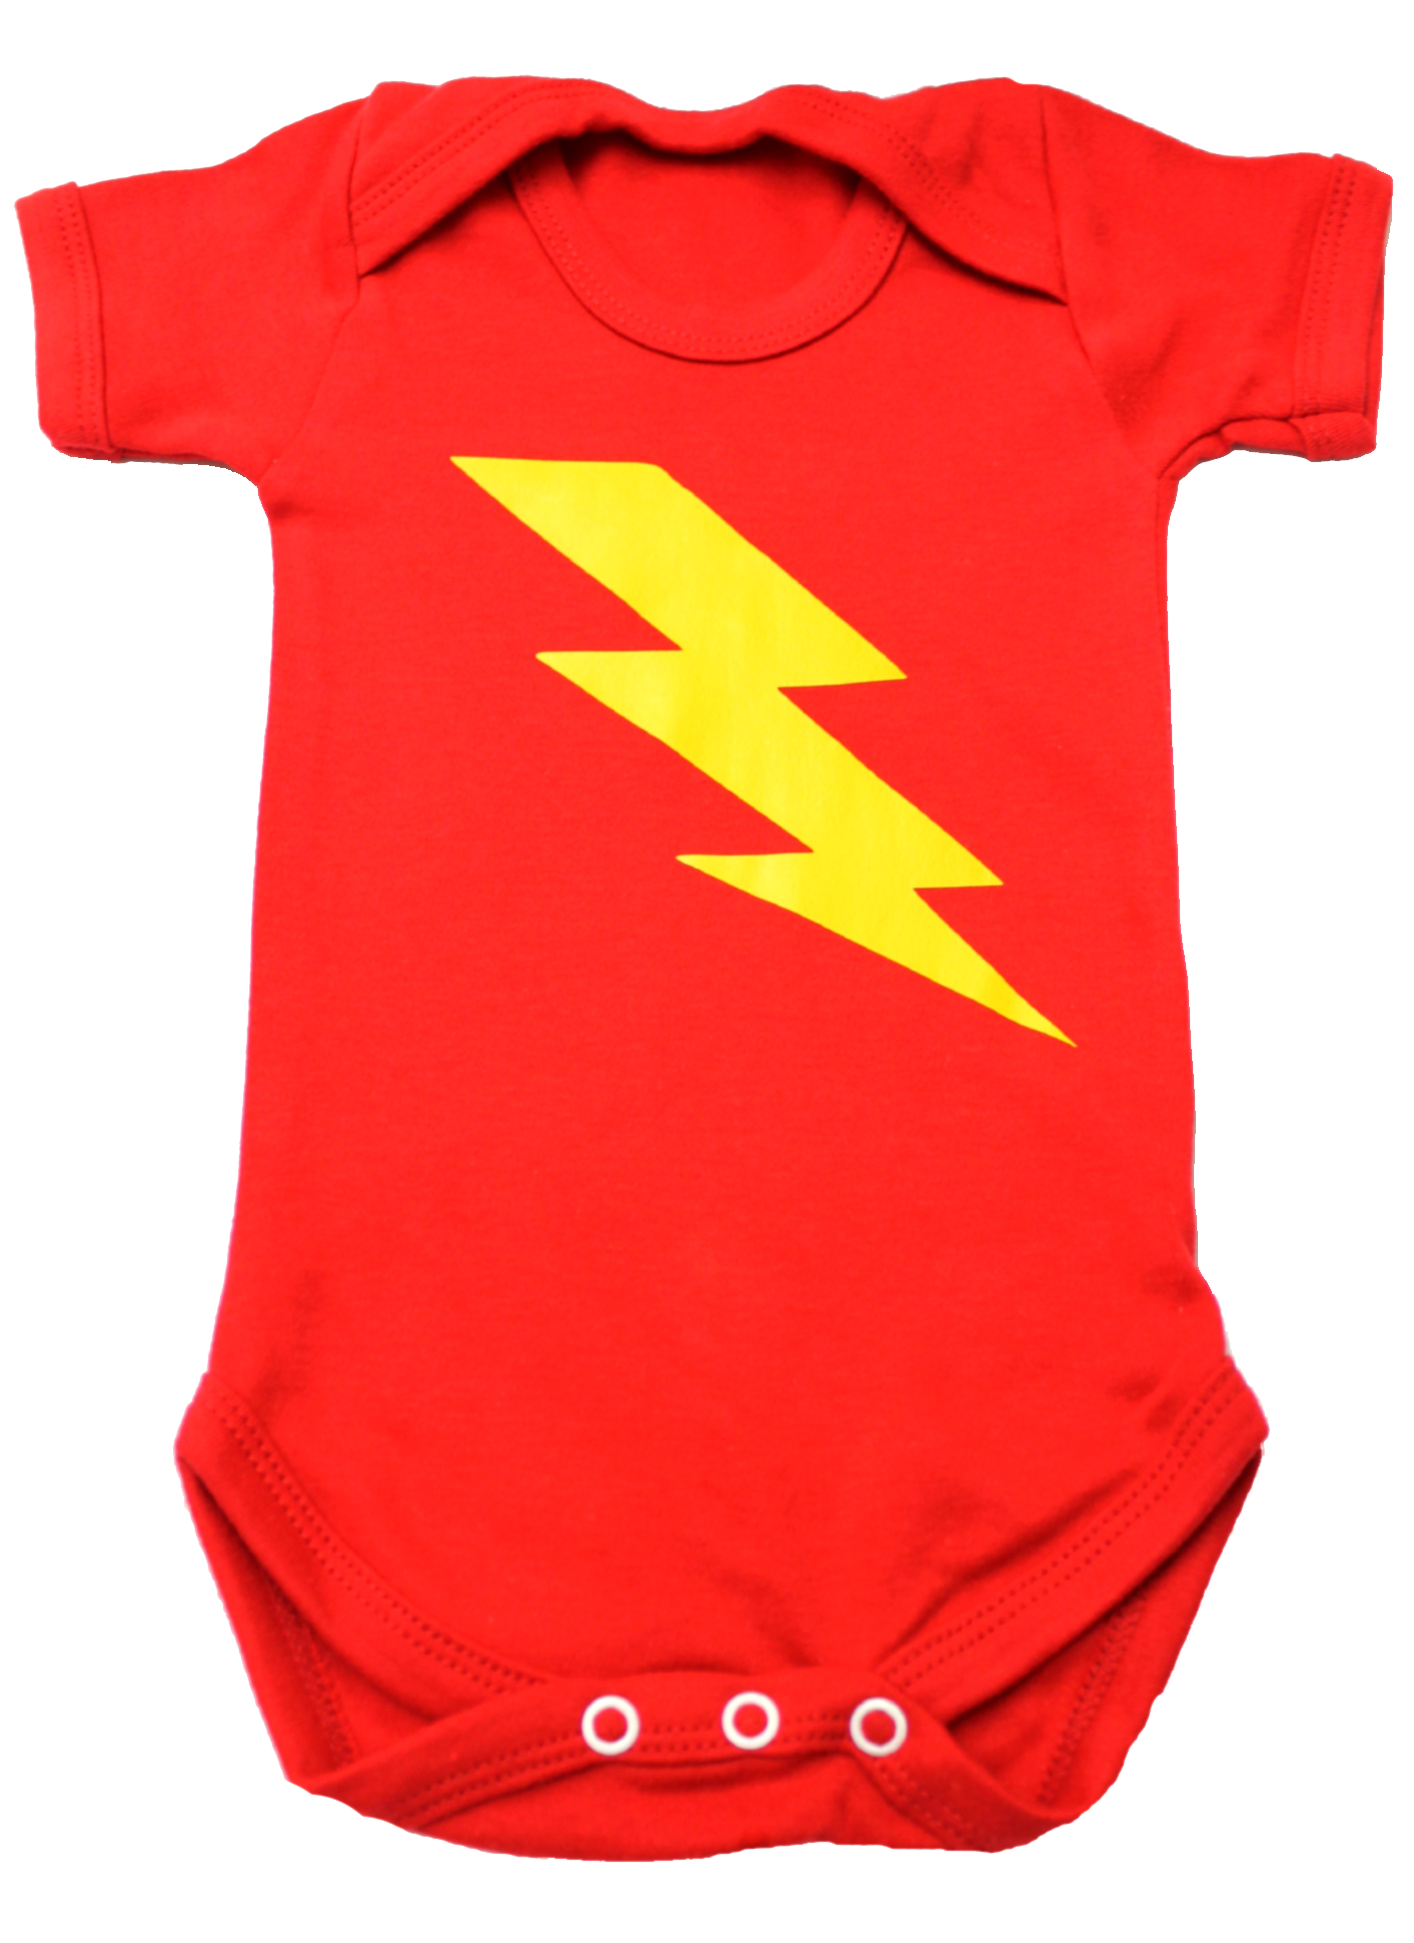 Baby Clothes HD HQ Image Free PNG PNG Image